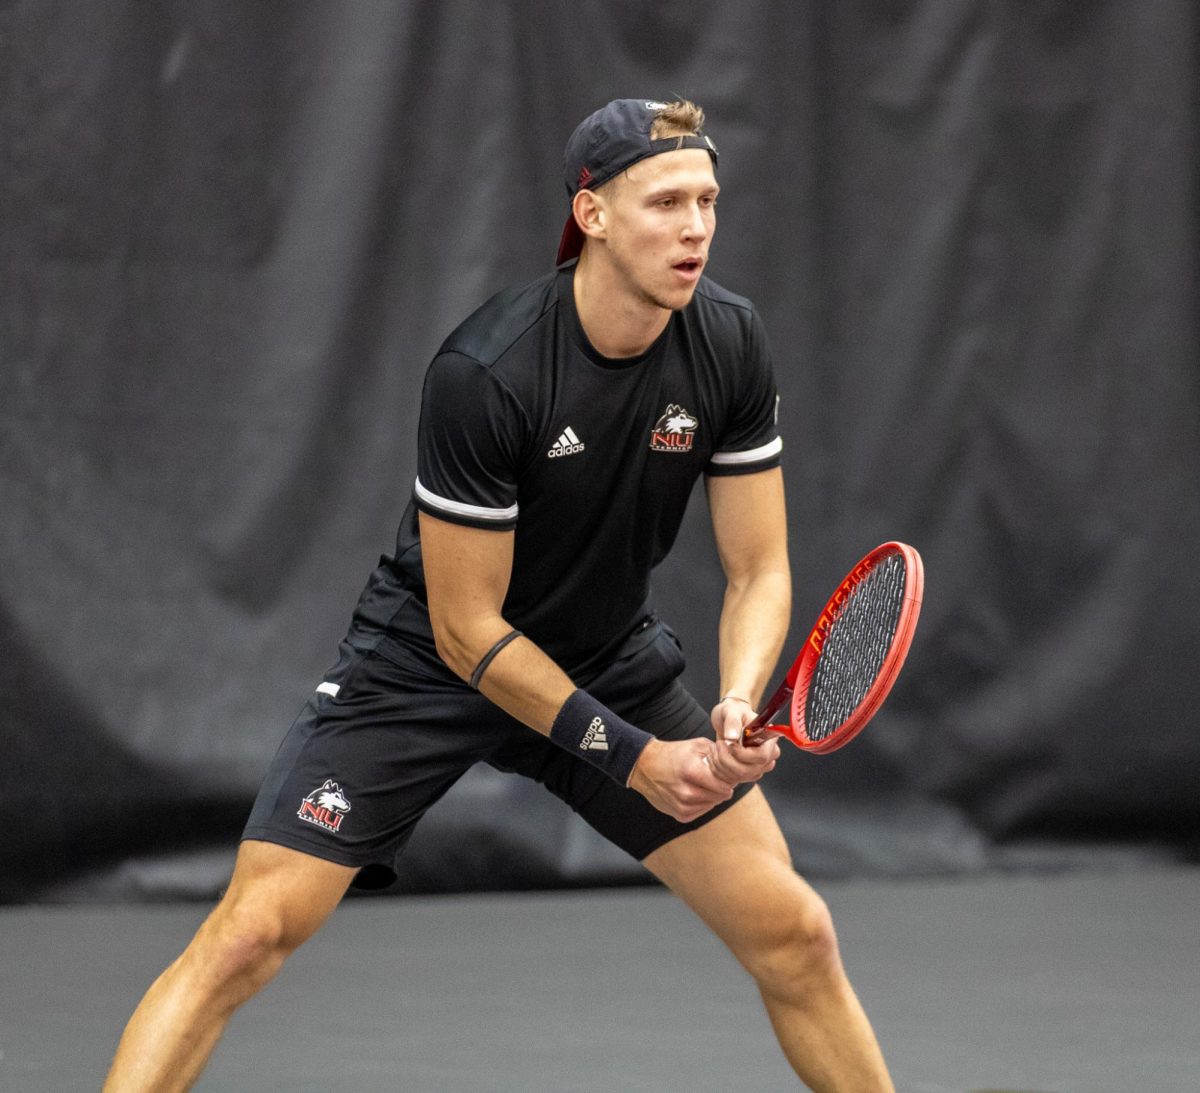 NIU senior Mikael Vollbach gets set to receive the serve during singles. Vollbach scored the Huskies’ second point in a tight match that went to a second set tiebreaker as he defeated University of Nebraska Omaha sophomore Ryoma Mishiro with scores of 6-4, 7-6 and 7-5. (Tim Dodge | Northern Star)